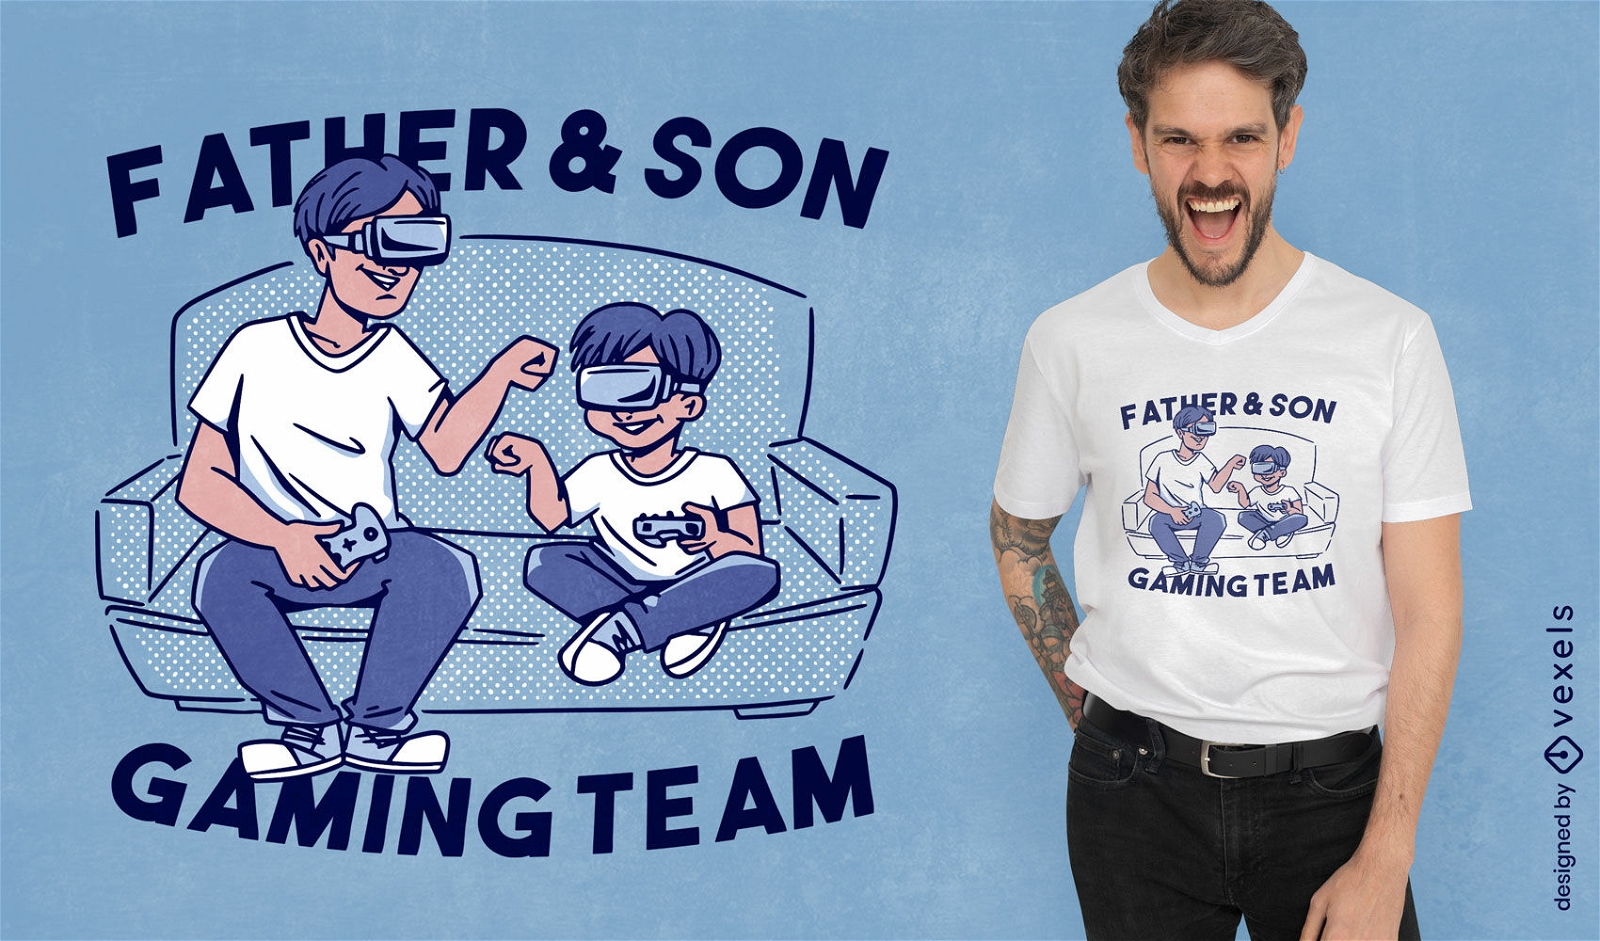 Father and son playing videogames t-shirt design